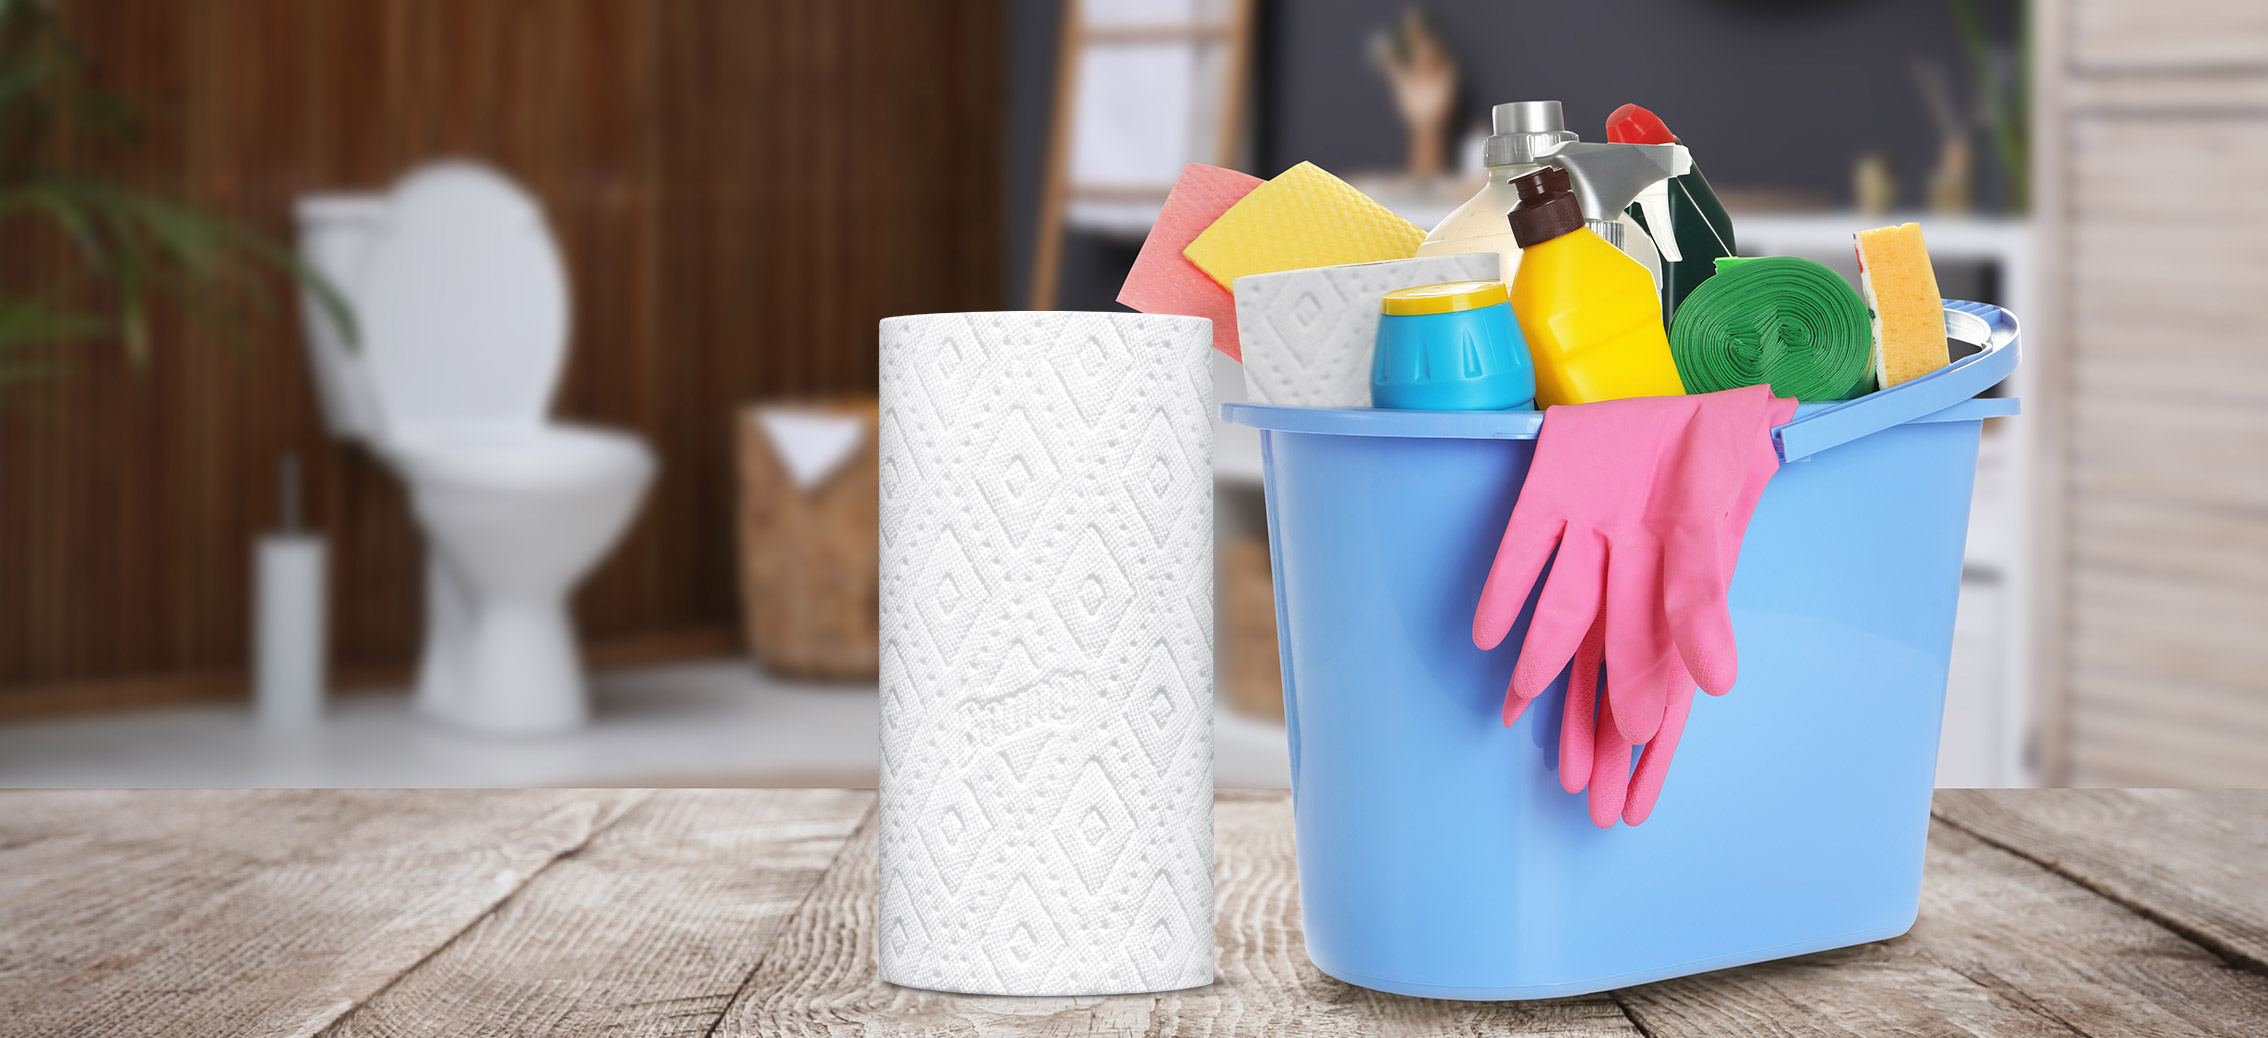 Tips On How To Clean Your Bathroom With Cleaning Checklist  Bounty